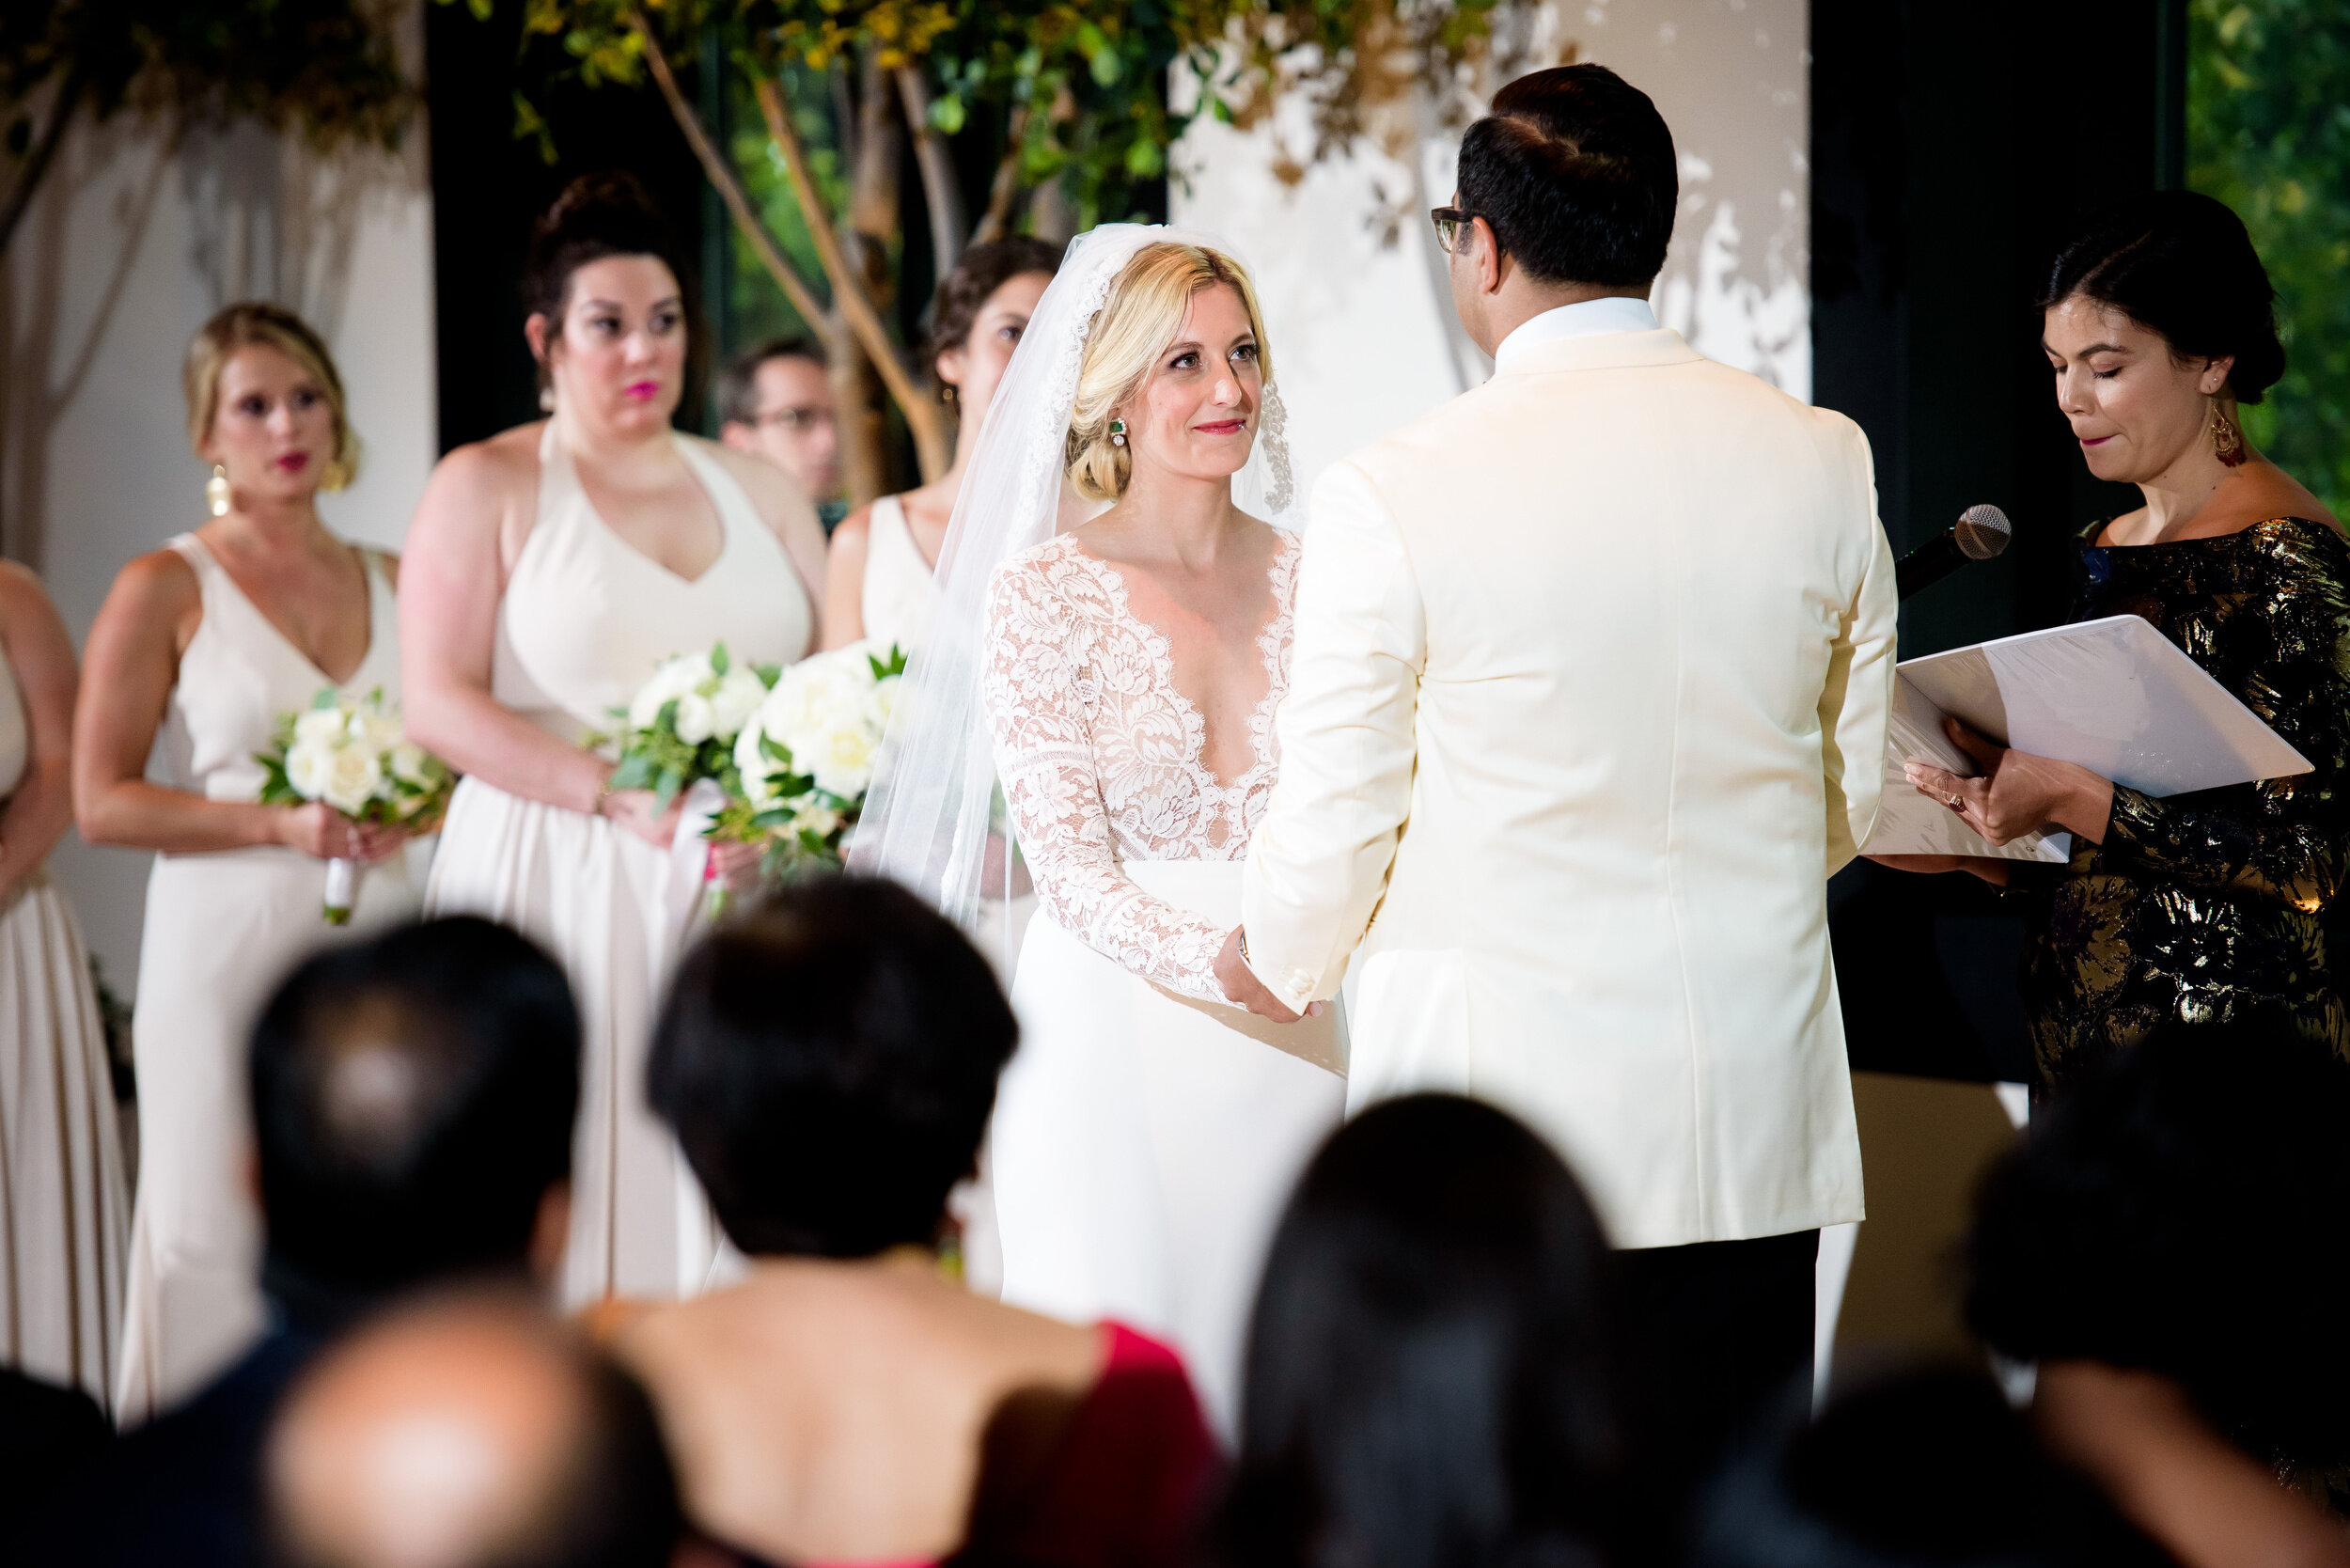 Bride and groom say their vows during the wedding ceremony: Geraghty Chicago wedding photography captured by J. Brown Photography.